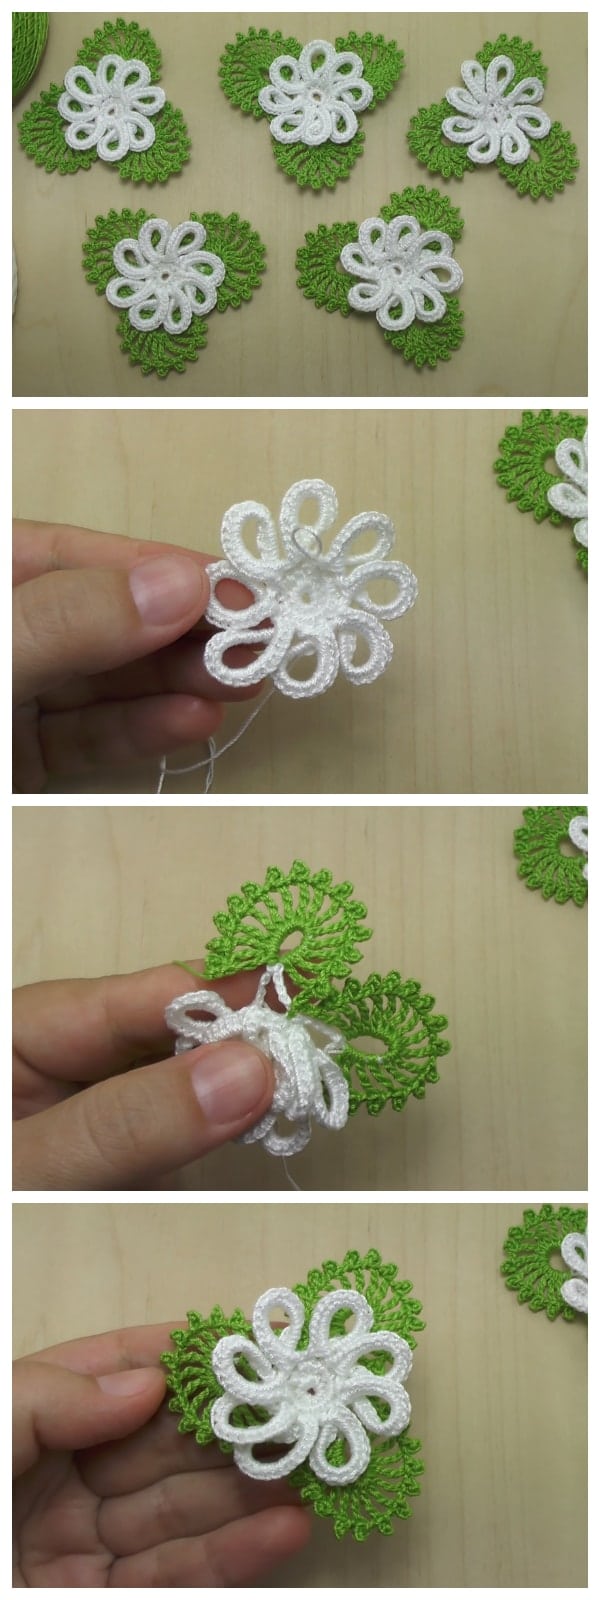 3-Petal Crochet Flower Trim is great to make as a gorgeous gift. This also makes a wonderful embellishment for clothing or accessories.